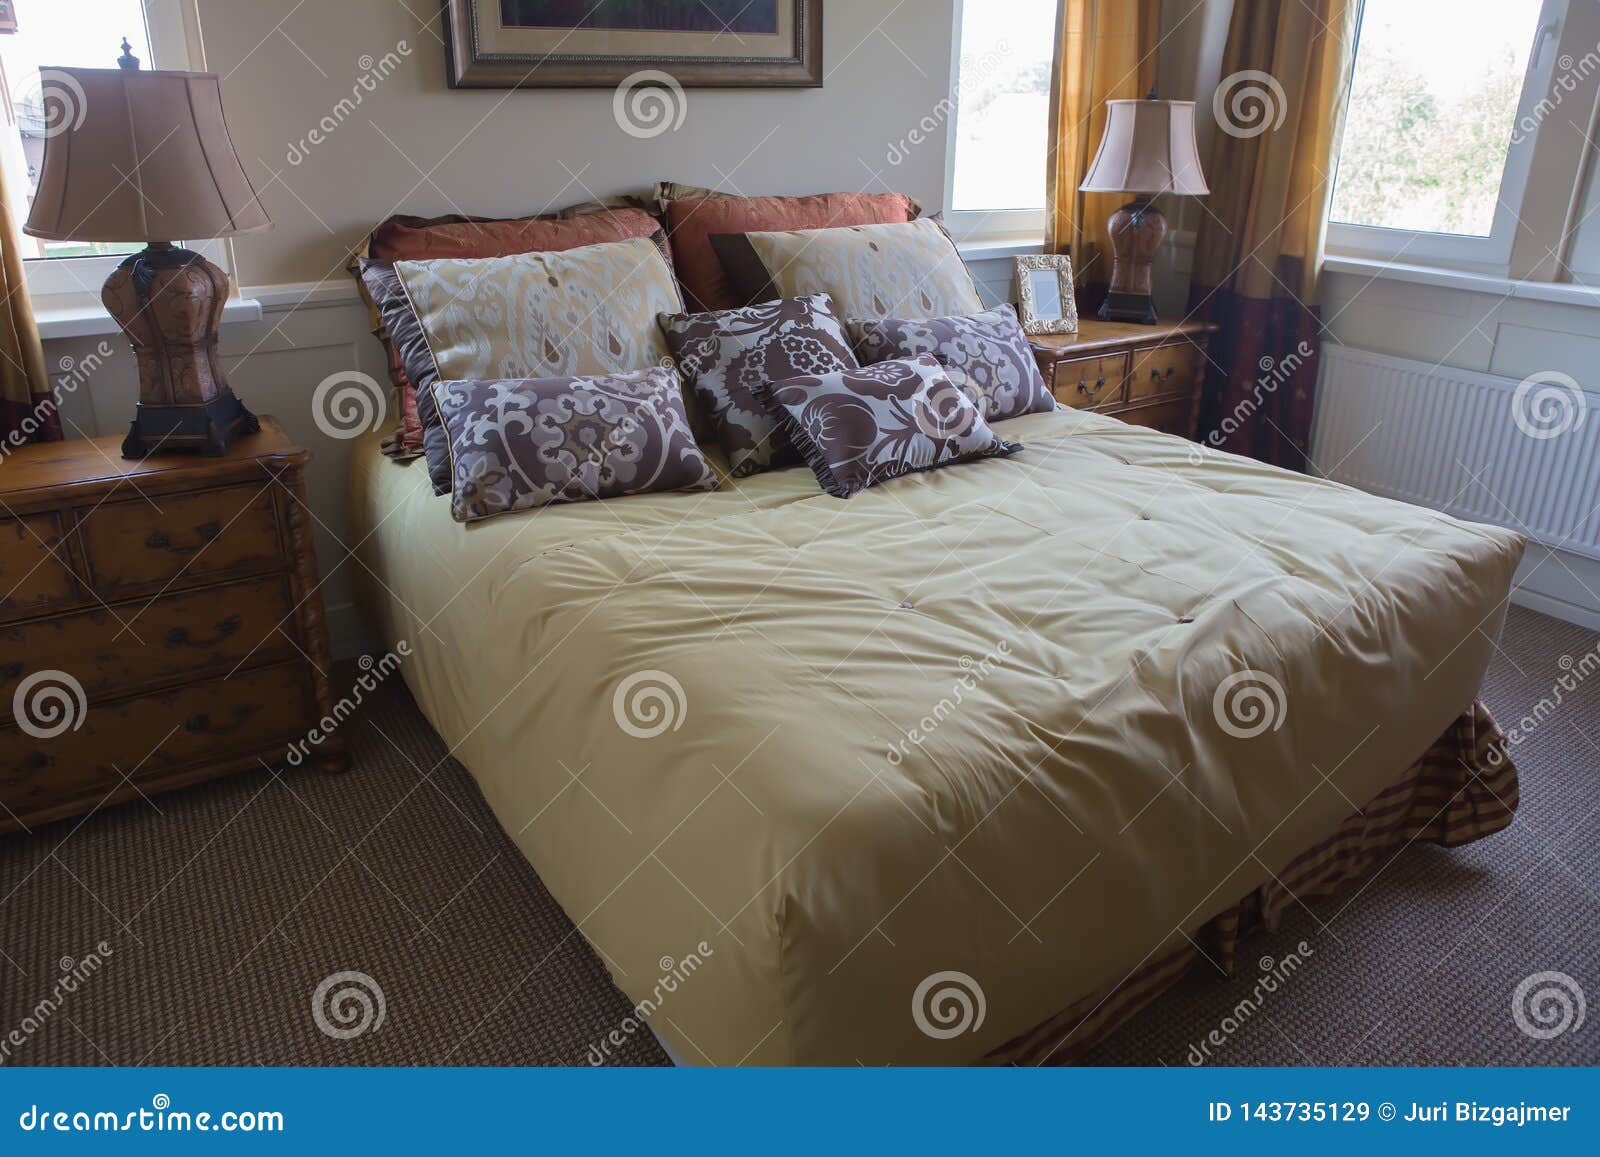 Bedroom With A Large Bed Stock Image Image Of Design 143735129